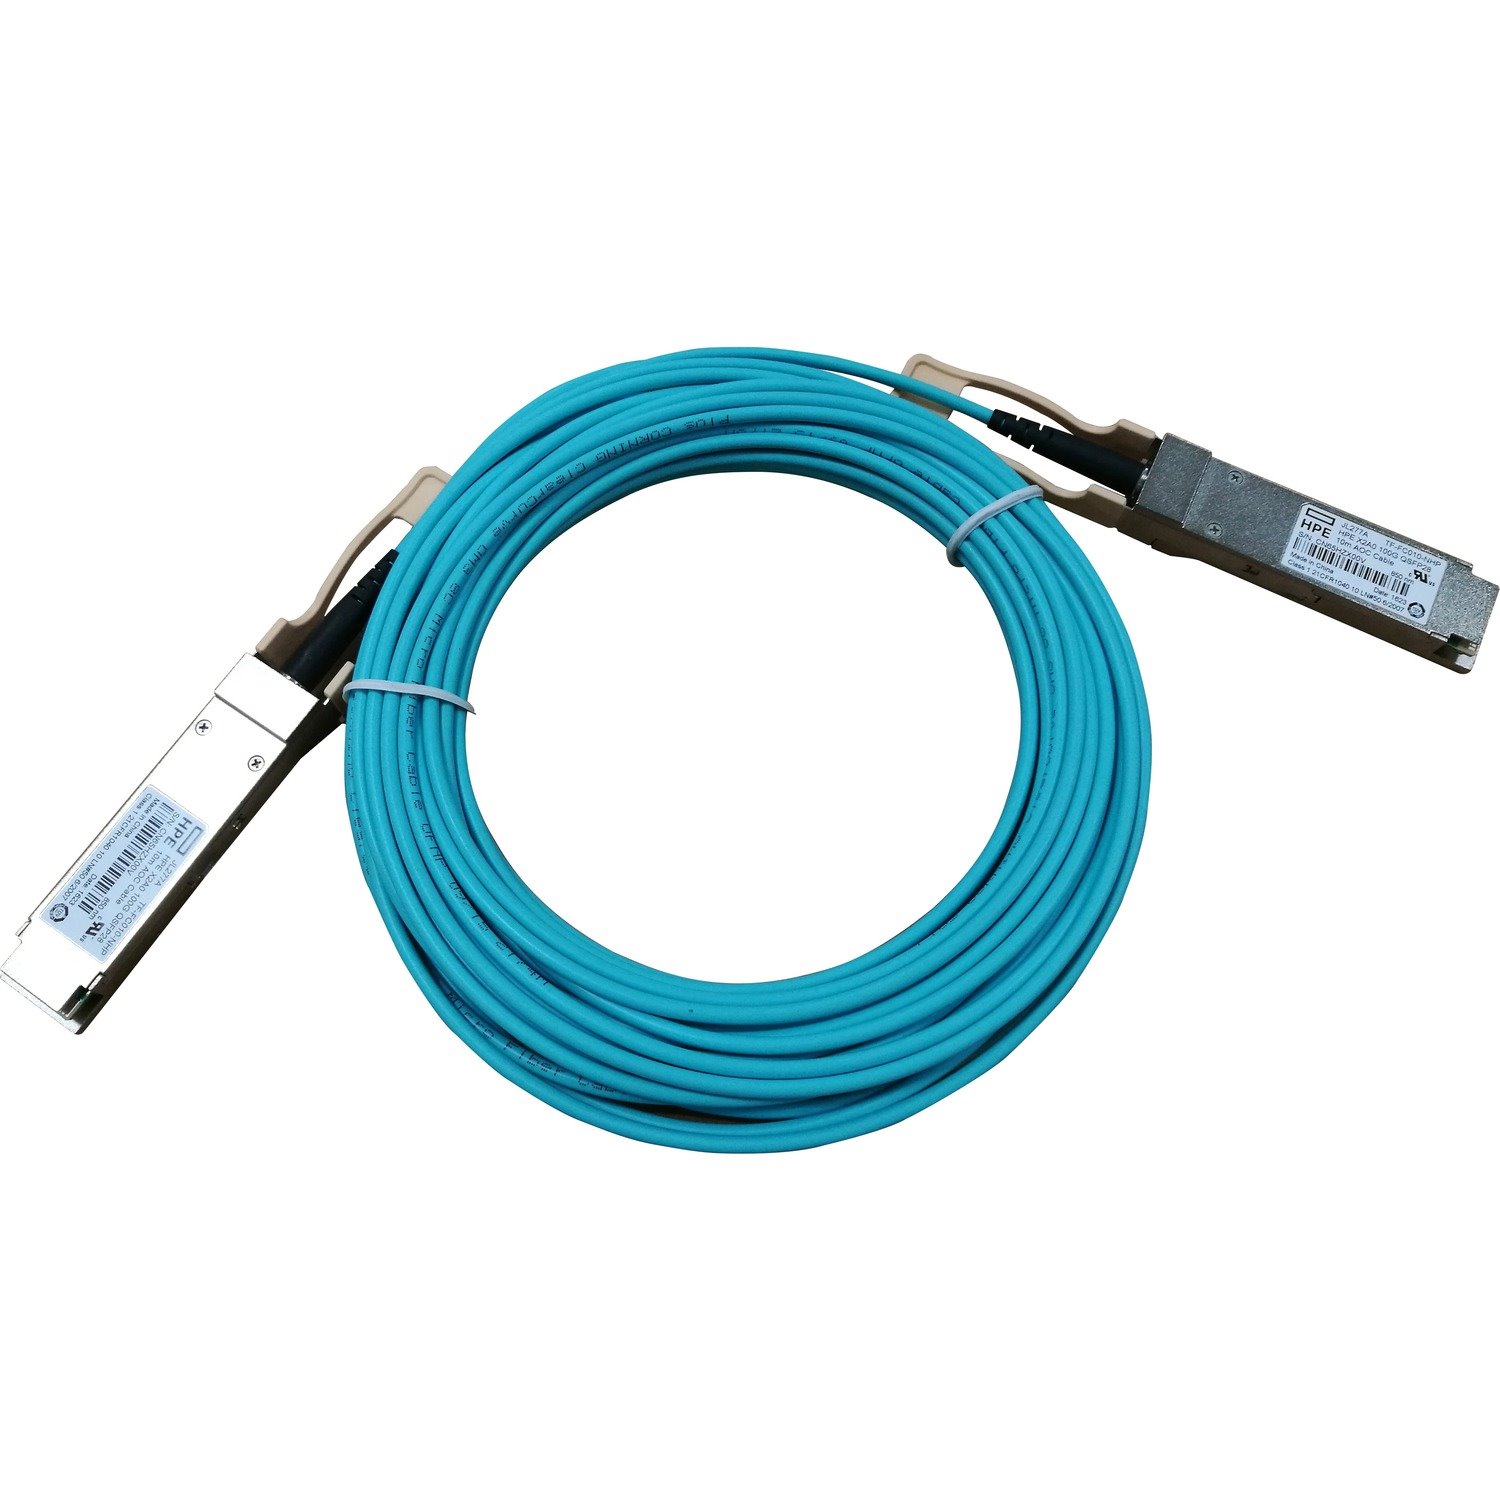 HPE 10 m Fibre Optic Network Cable for Network Device, Switch